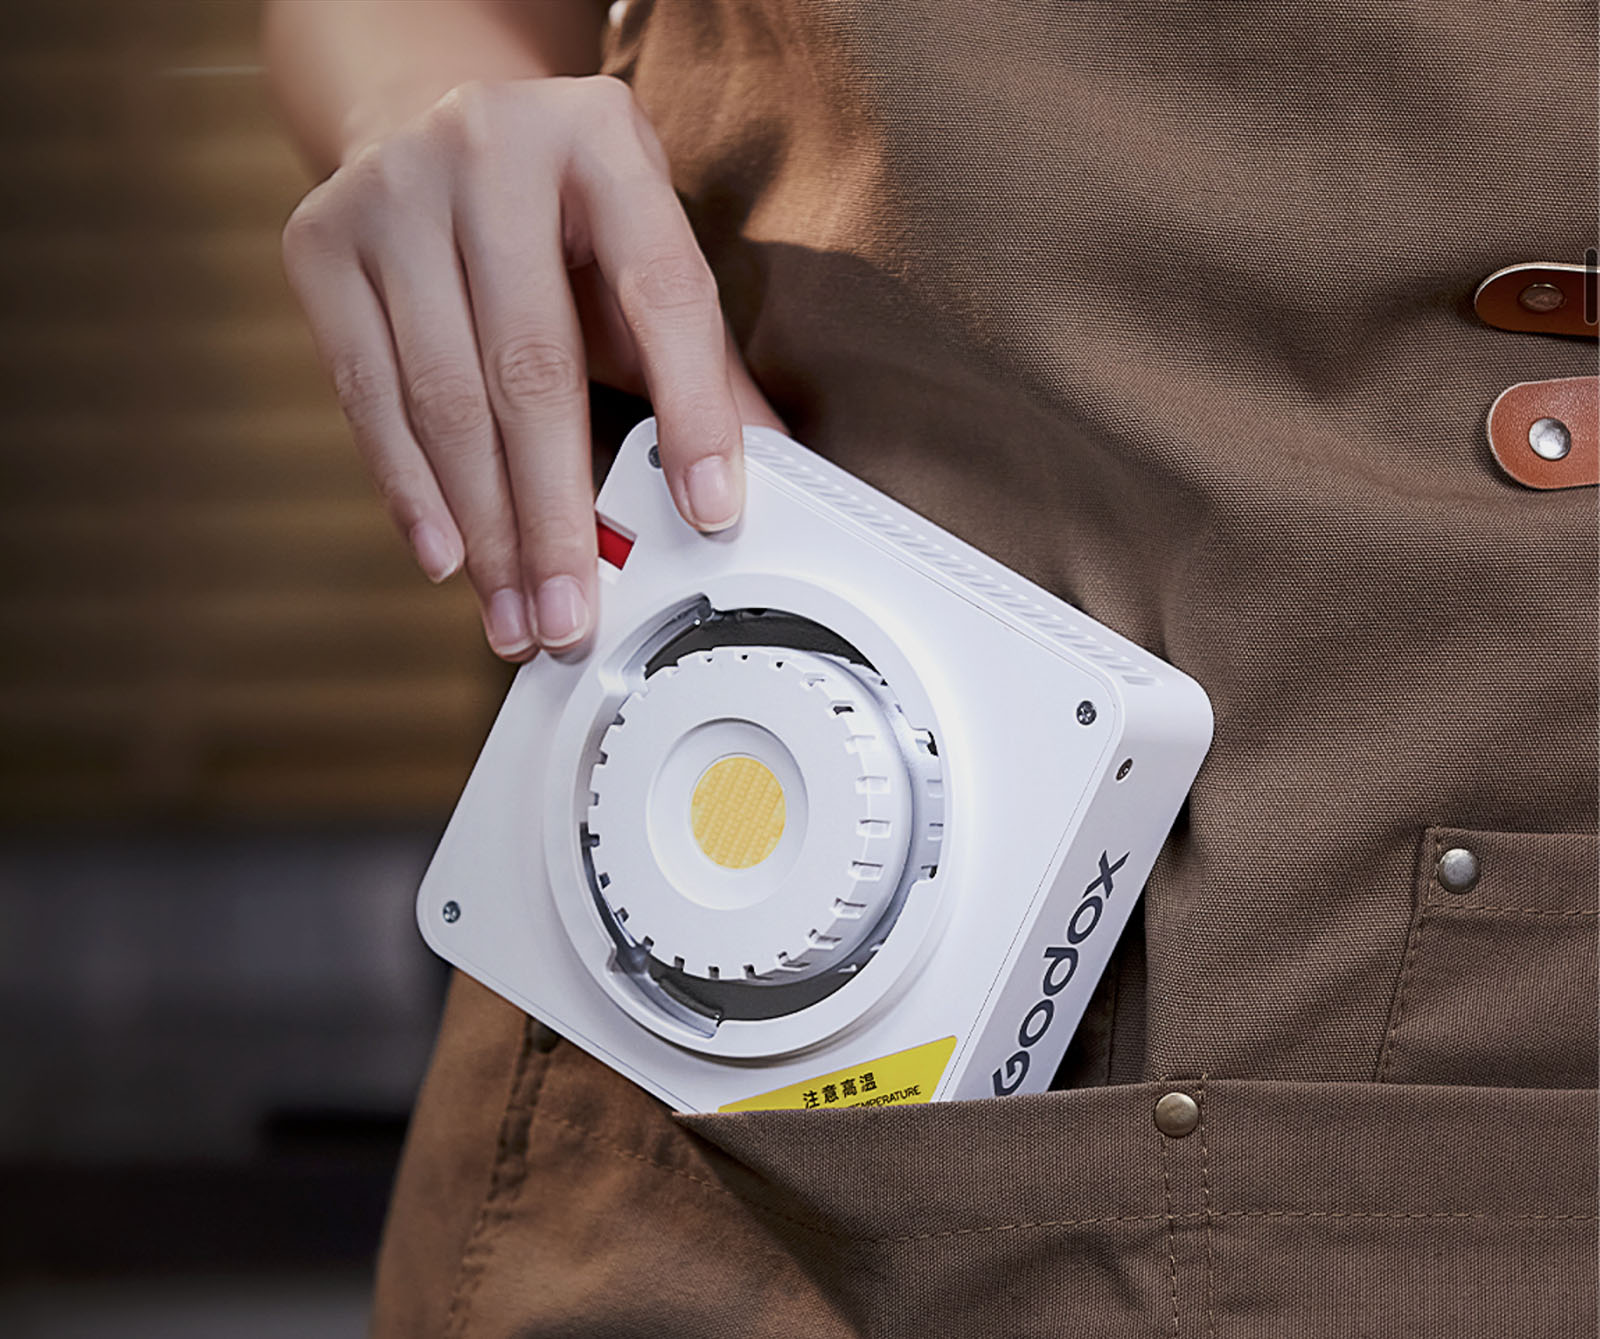 A person wearing a brown apron is holding a compact white device with a circular component and text on it. The device is partially tucked into the apron pocket. The background is blurred, focusing on the device and hand.